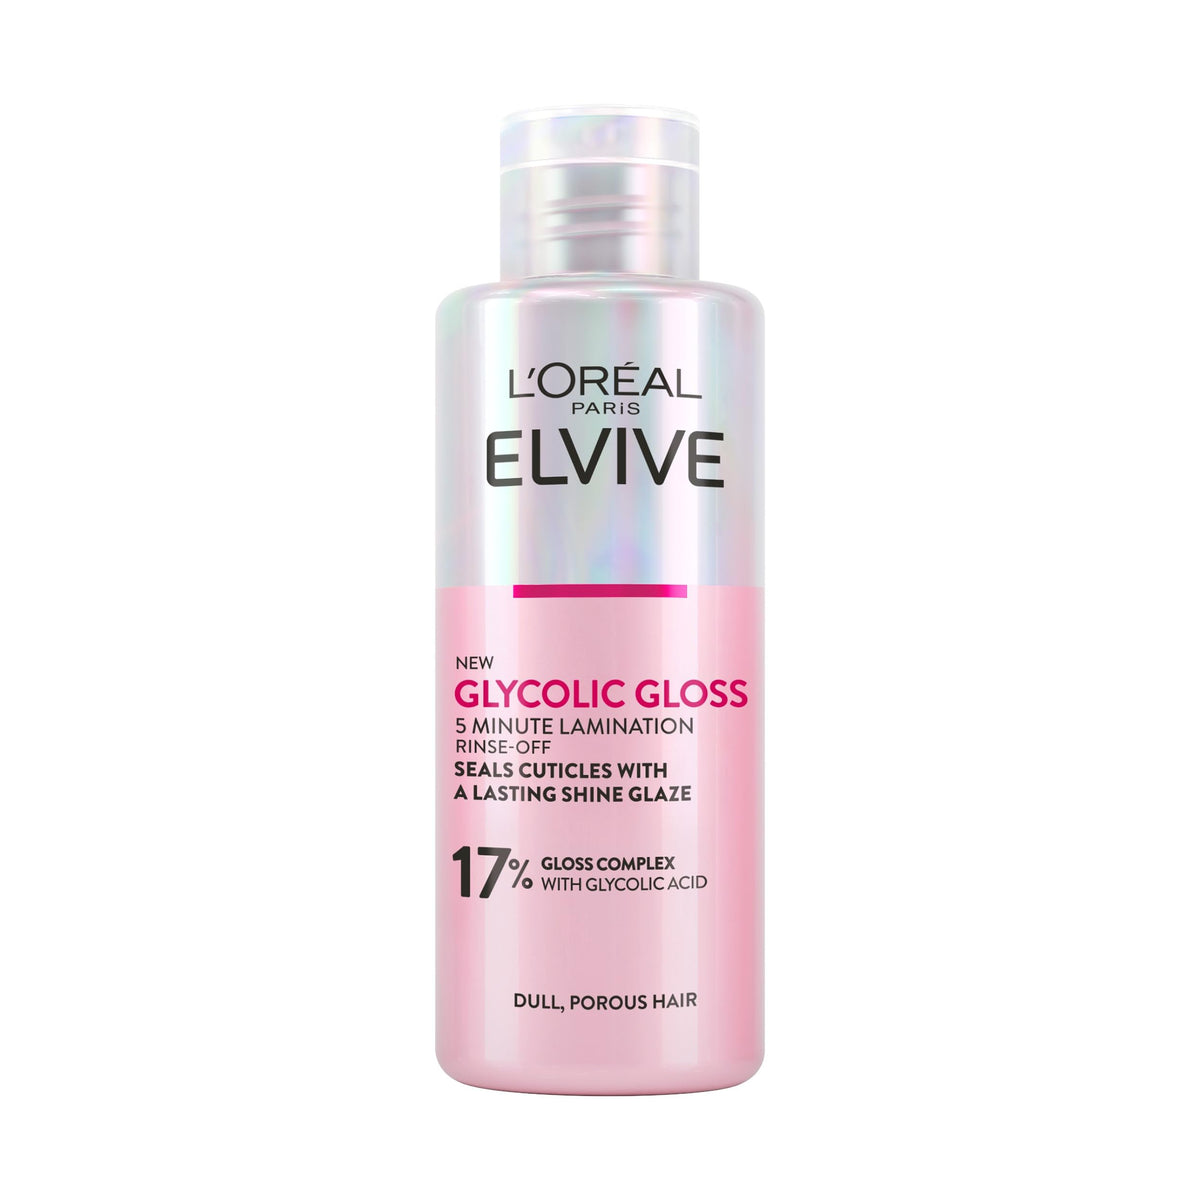 L'Oreal Paris Elvive Glycolic Gloss Lamination Rinse-Off Treatment, With Gloss Complex and Glycolic Acid, Fills and Seals Hair Fibres, For Long-lasting Smooth & Shiny Hair, Ideal for Dull Hair, 200ml